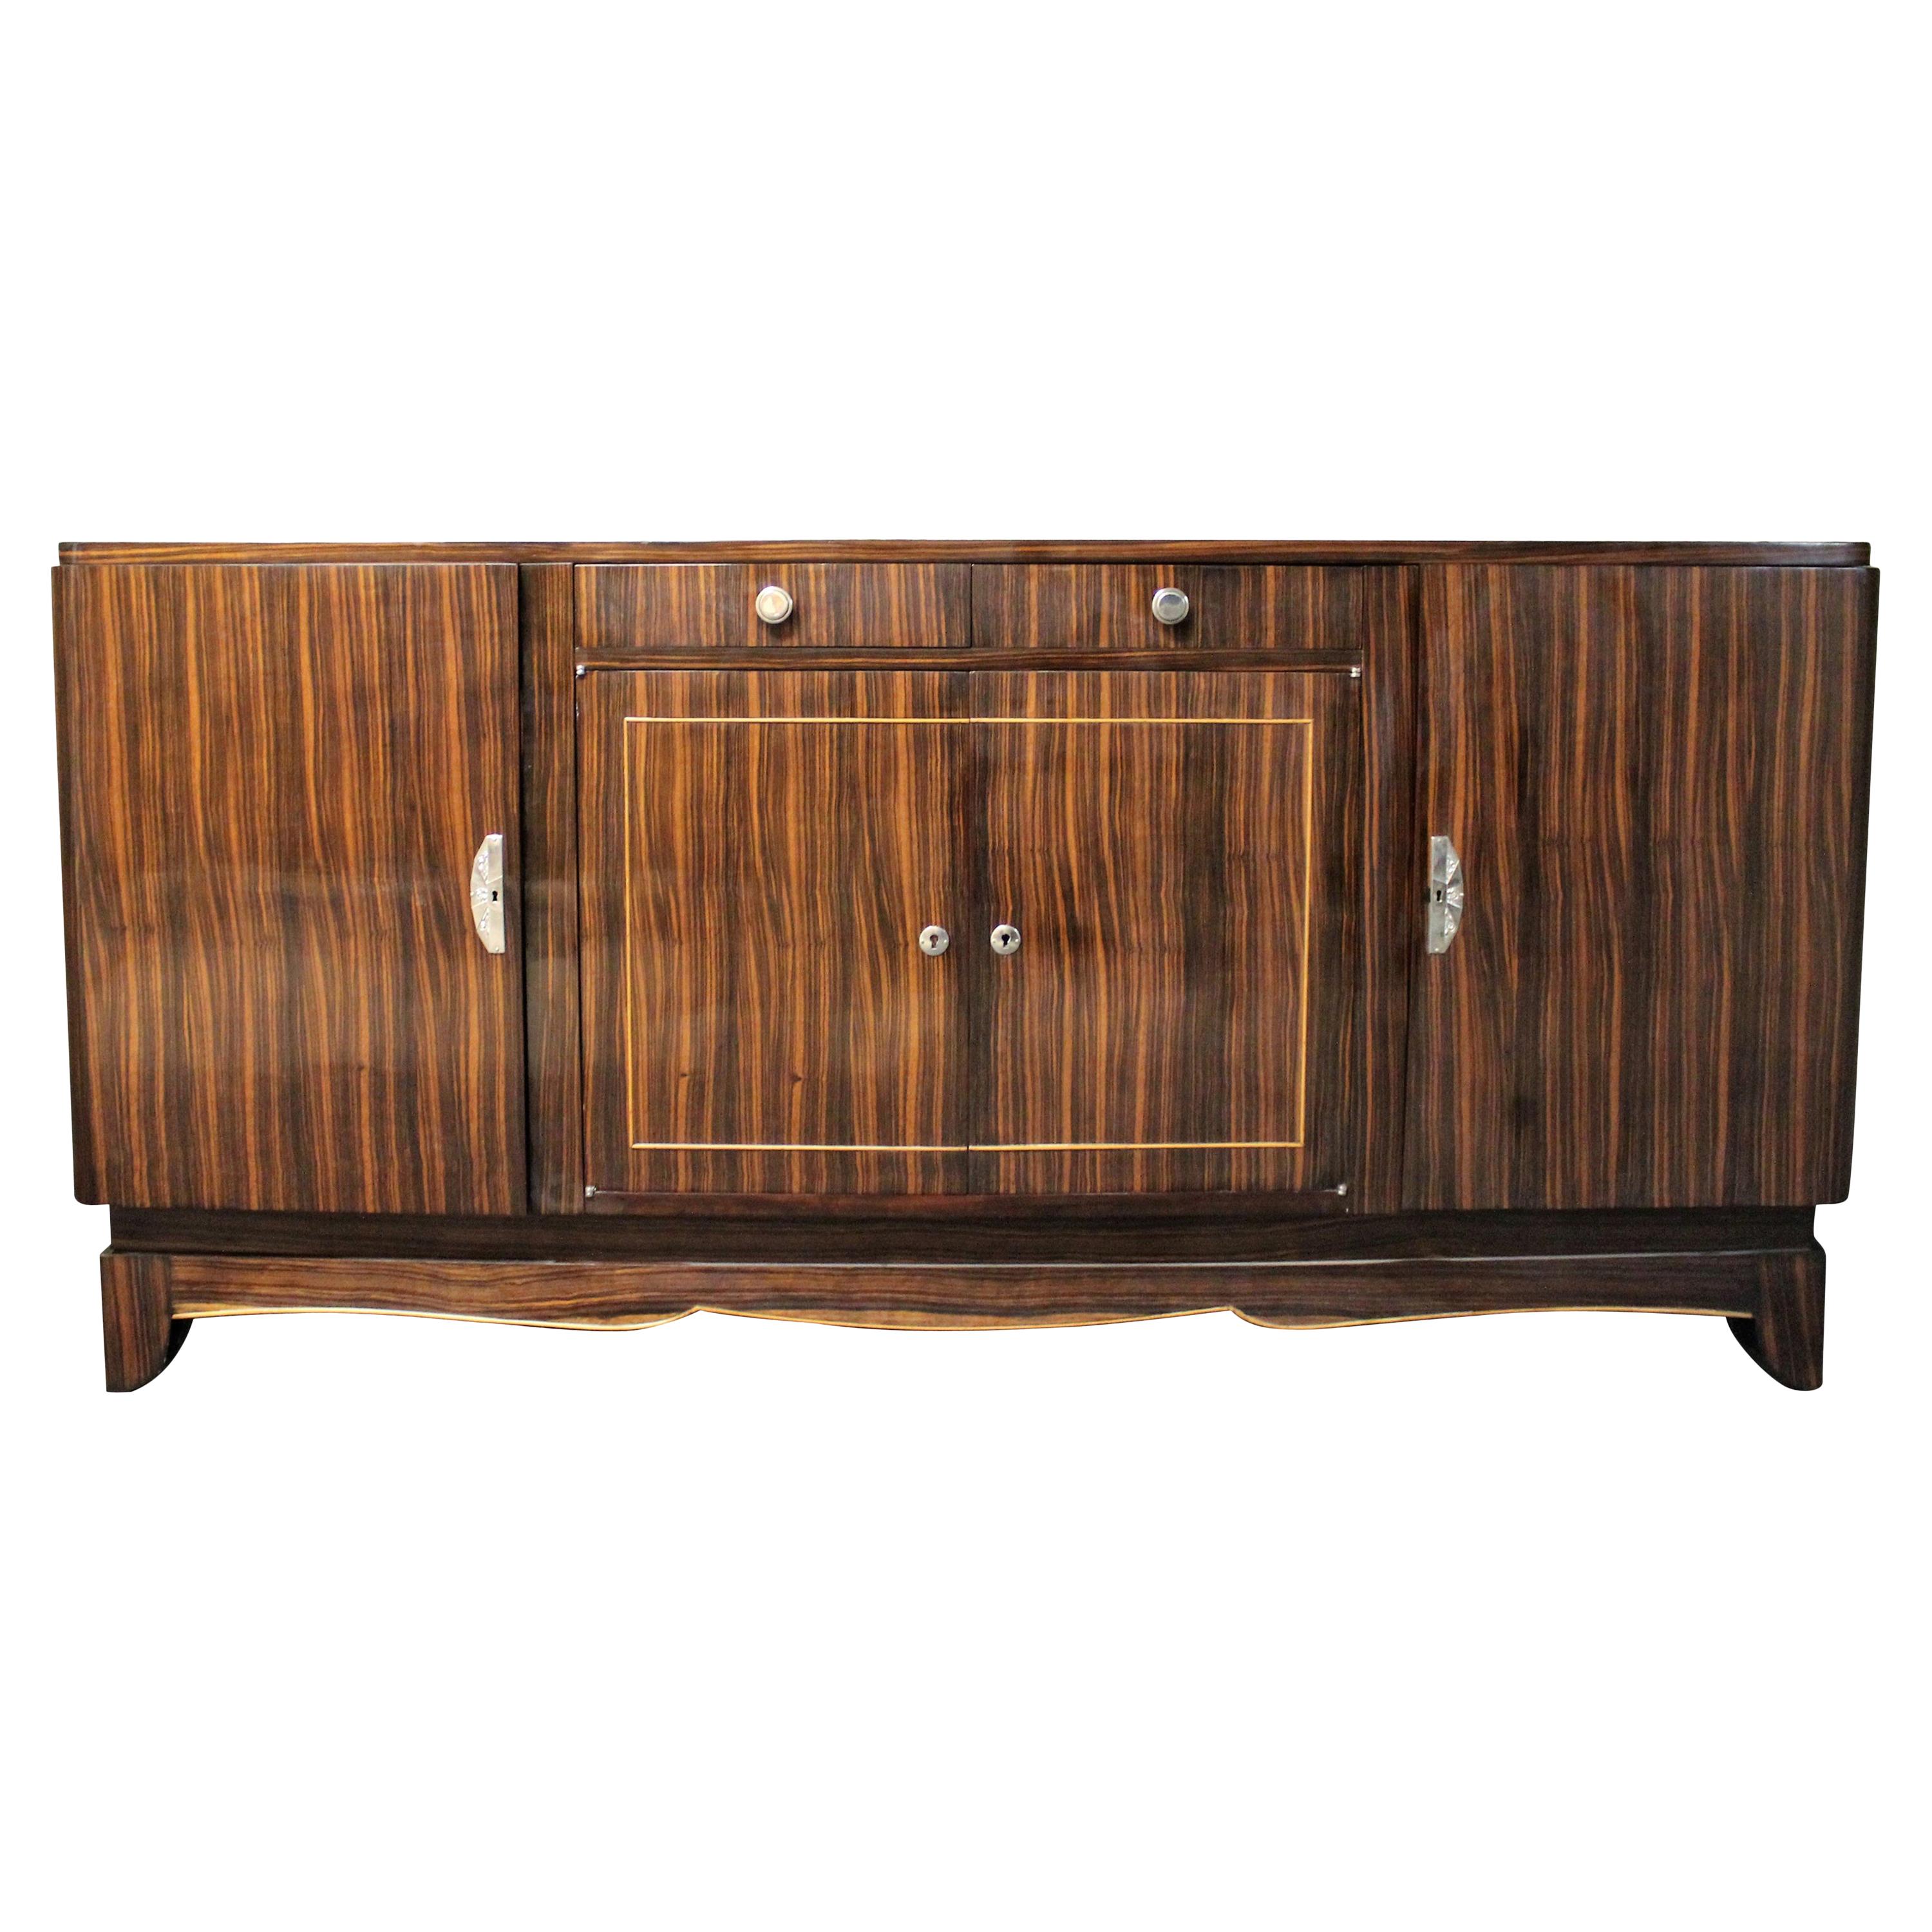 Art Deco Macassar Ebony Credenza in the Manner of Émile-Jacques Ruhlmann